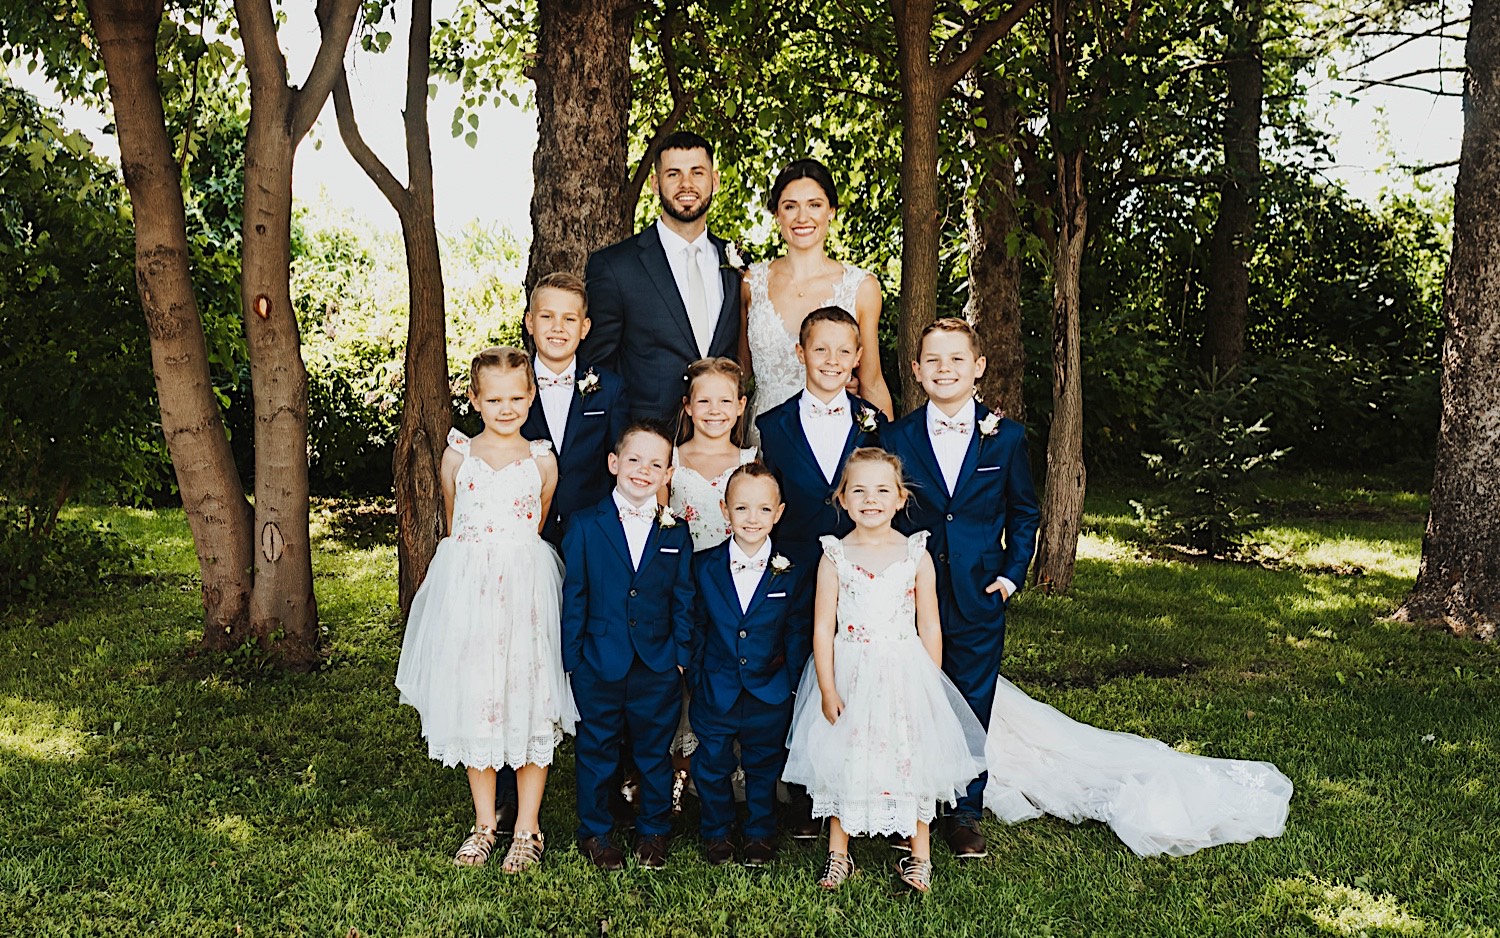 A bride and groom stand with a group of young children in front of a cluster of trees after their wedding ceremony at Legacy Hill Farm